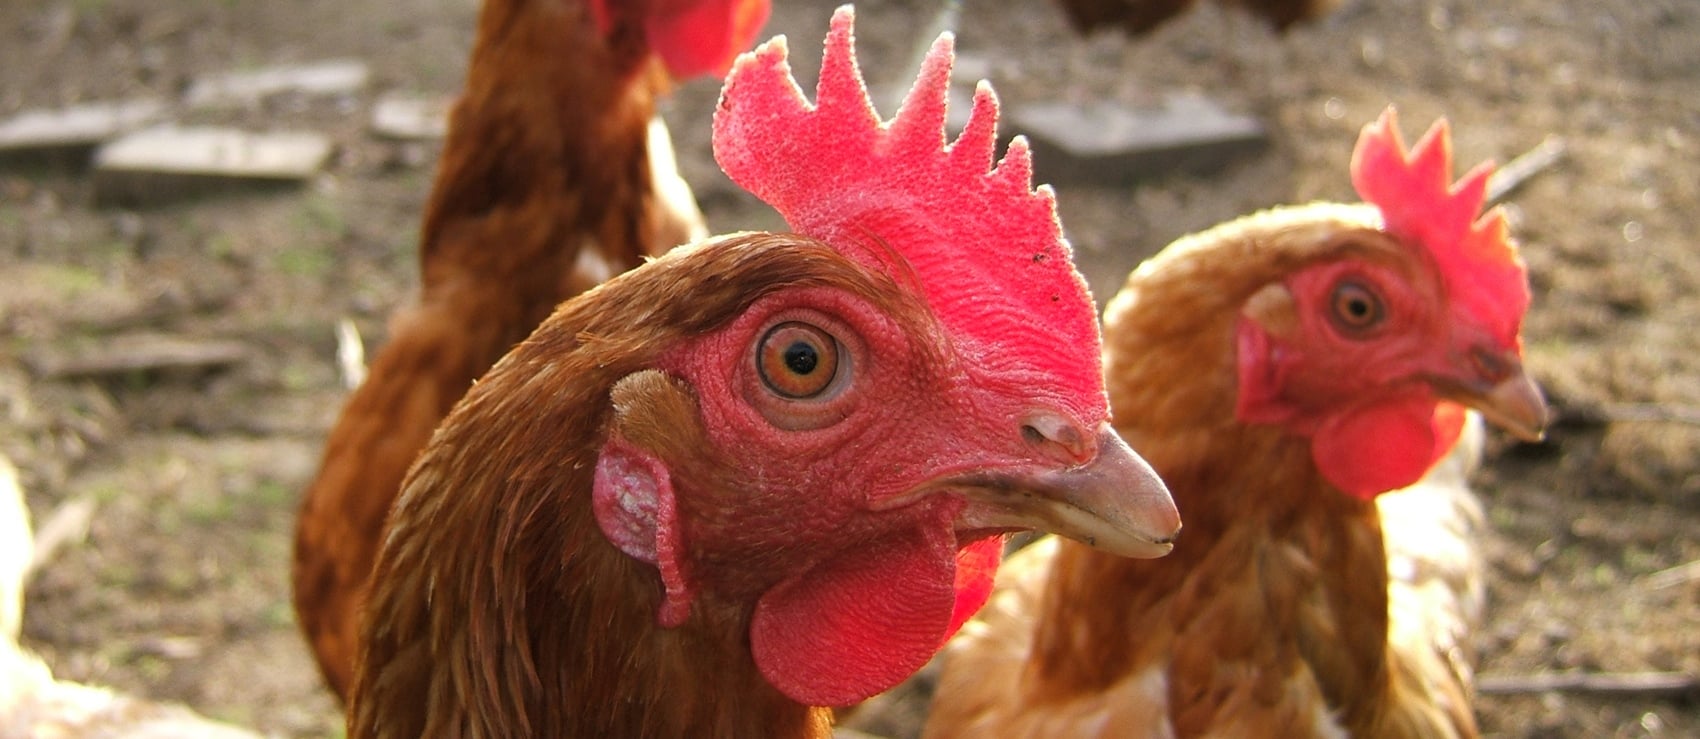 Poultry Exposure Tied to Liver and Pancreas Cancer